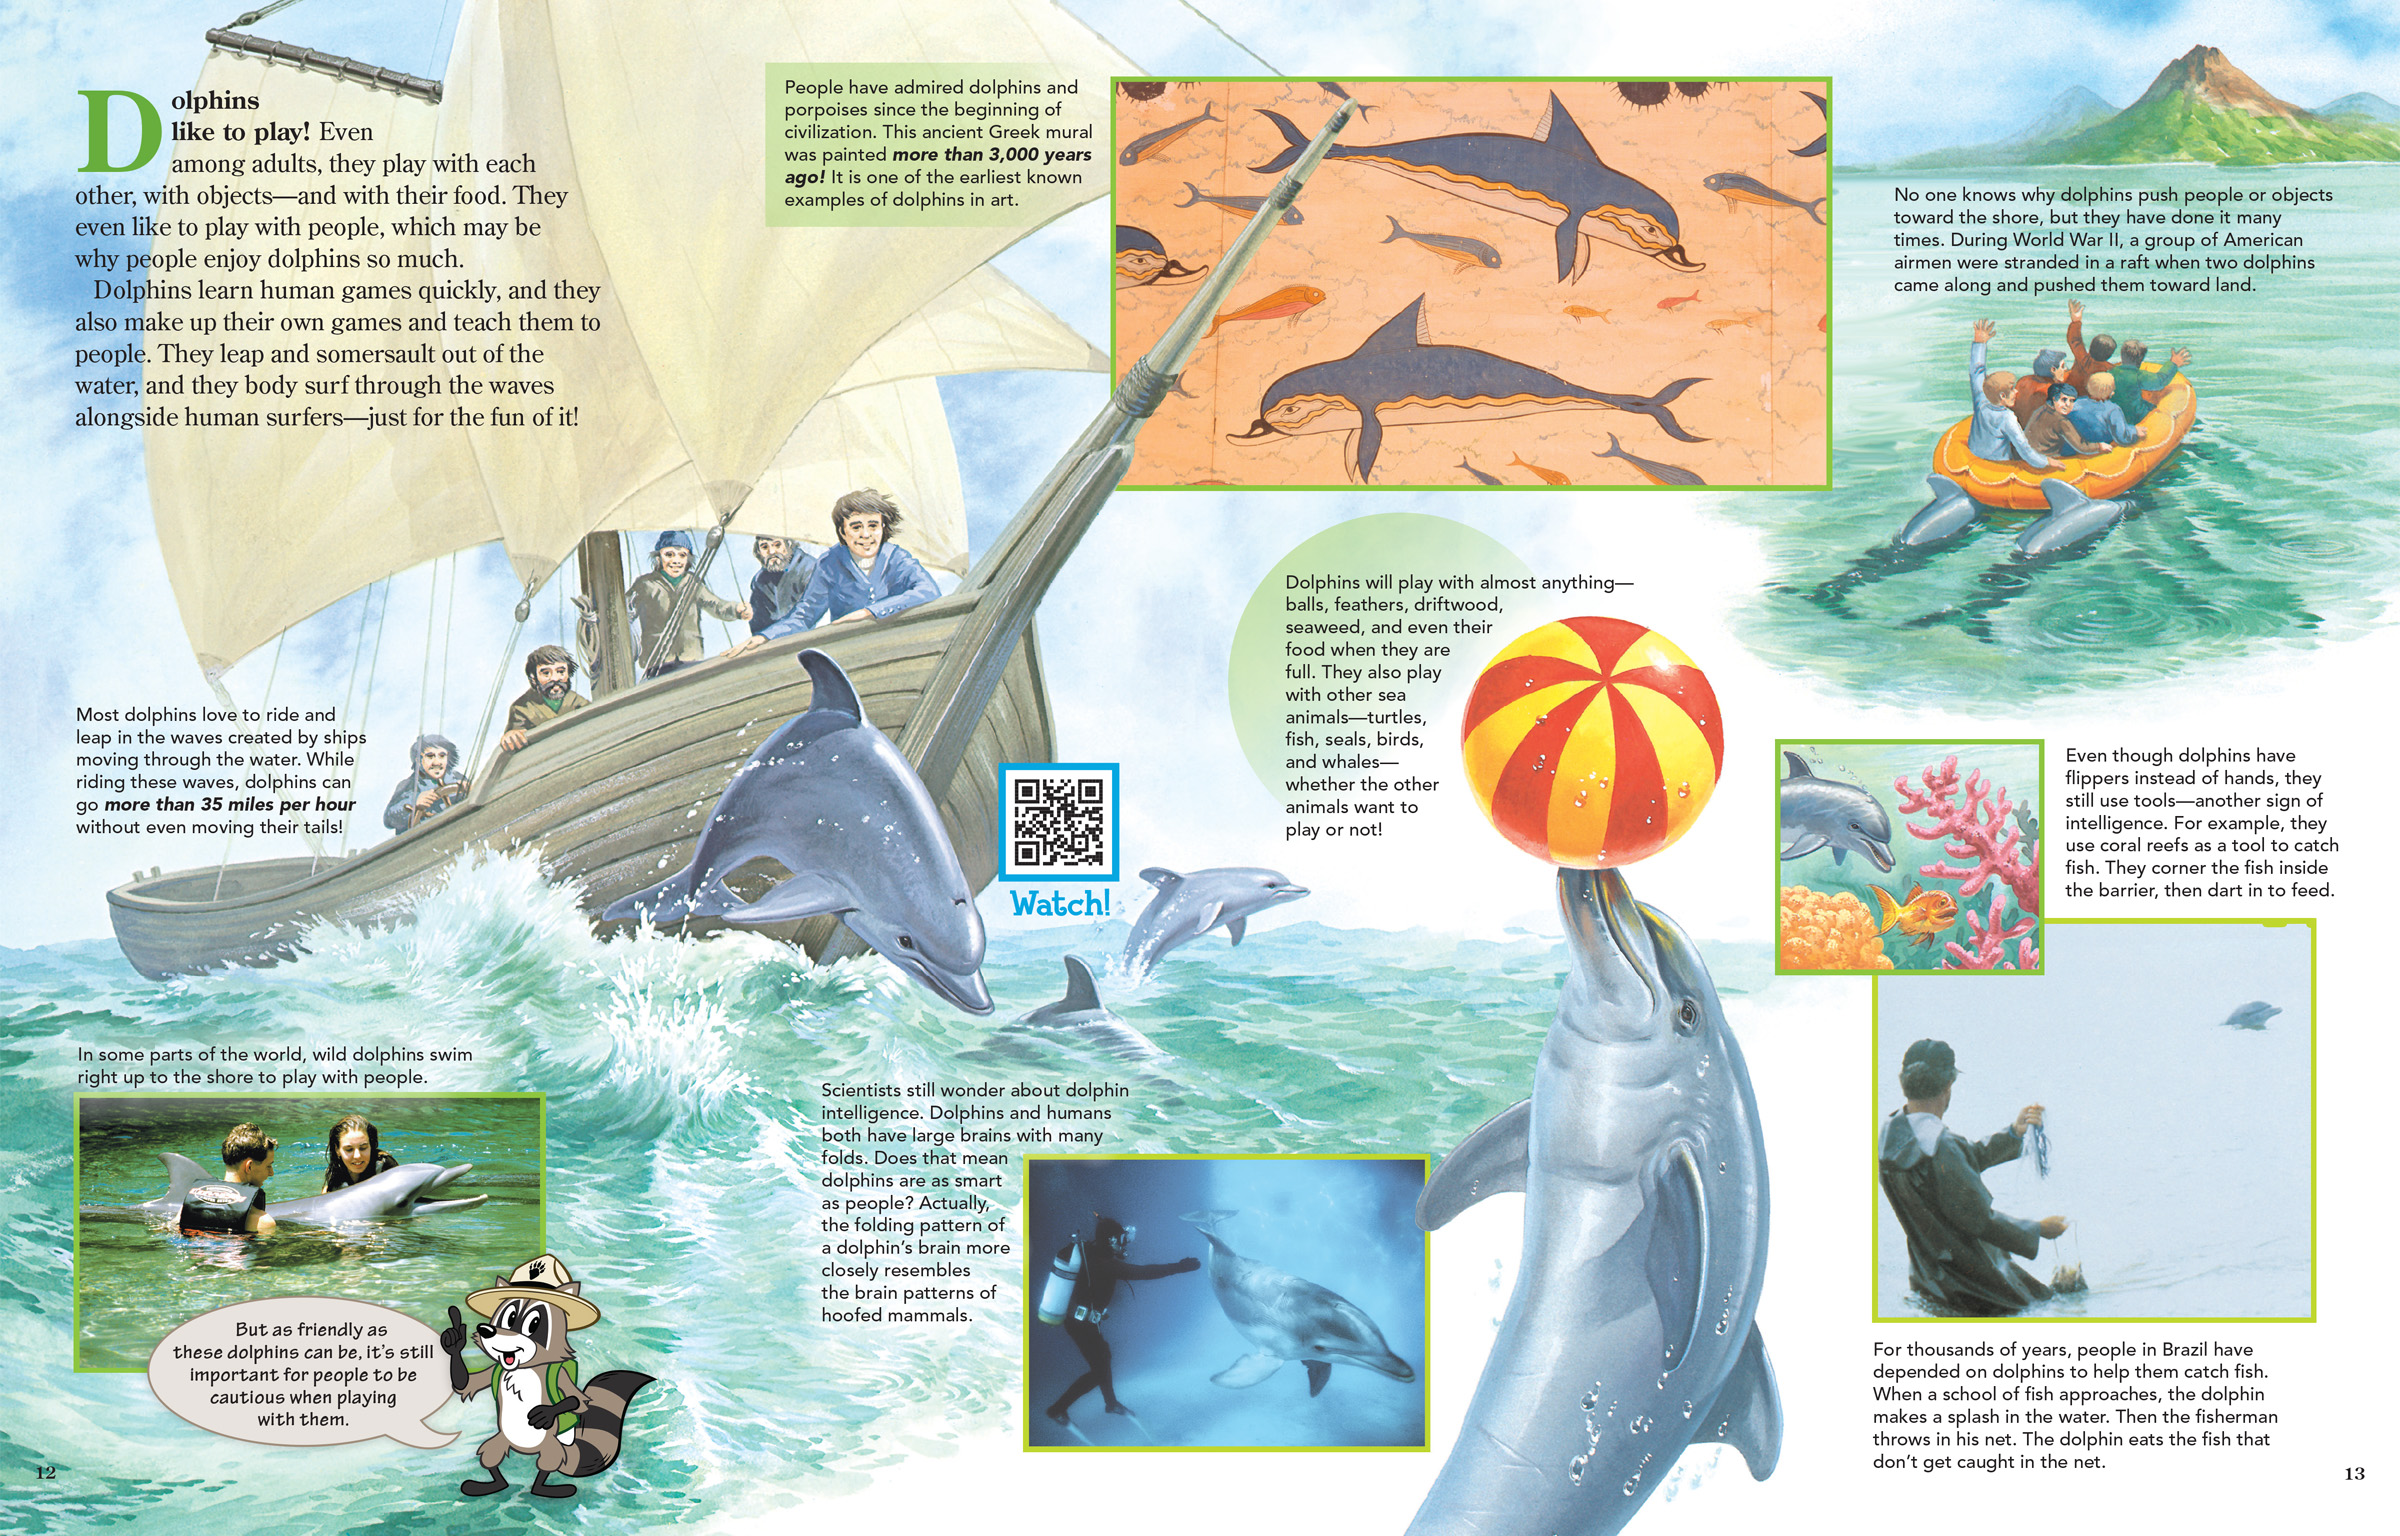 Examples of dolphins interacting with people: playing, fishing, helping, surfing. Plus ancient dolphin art.